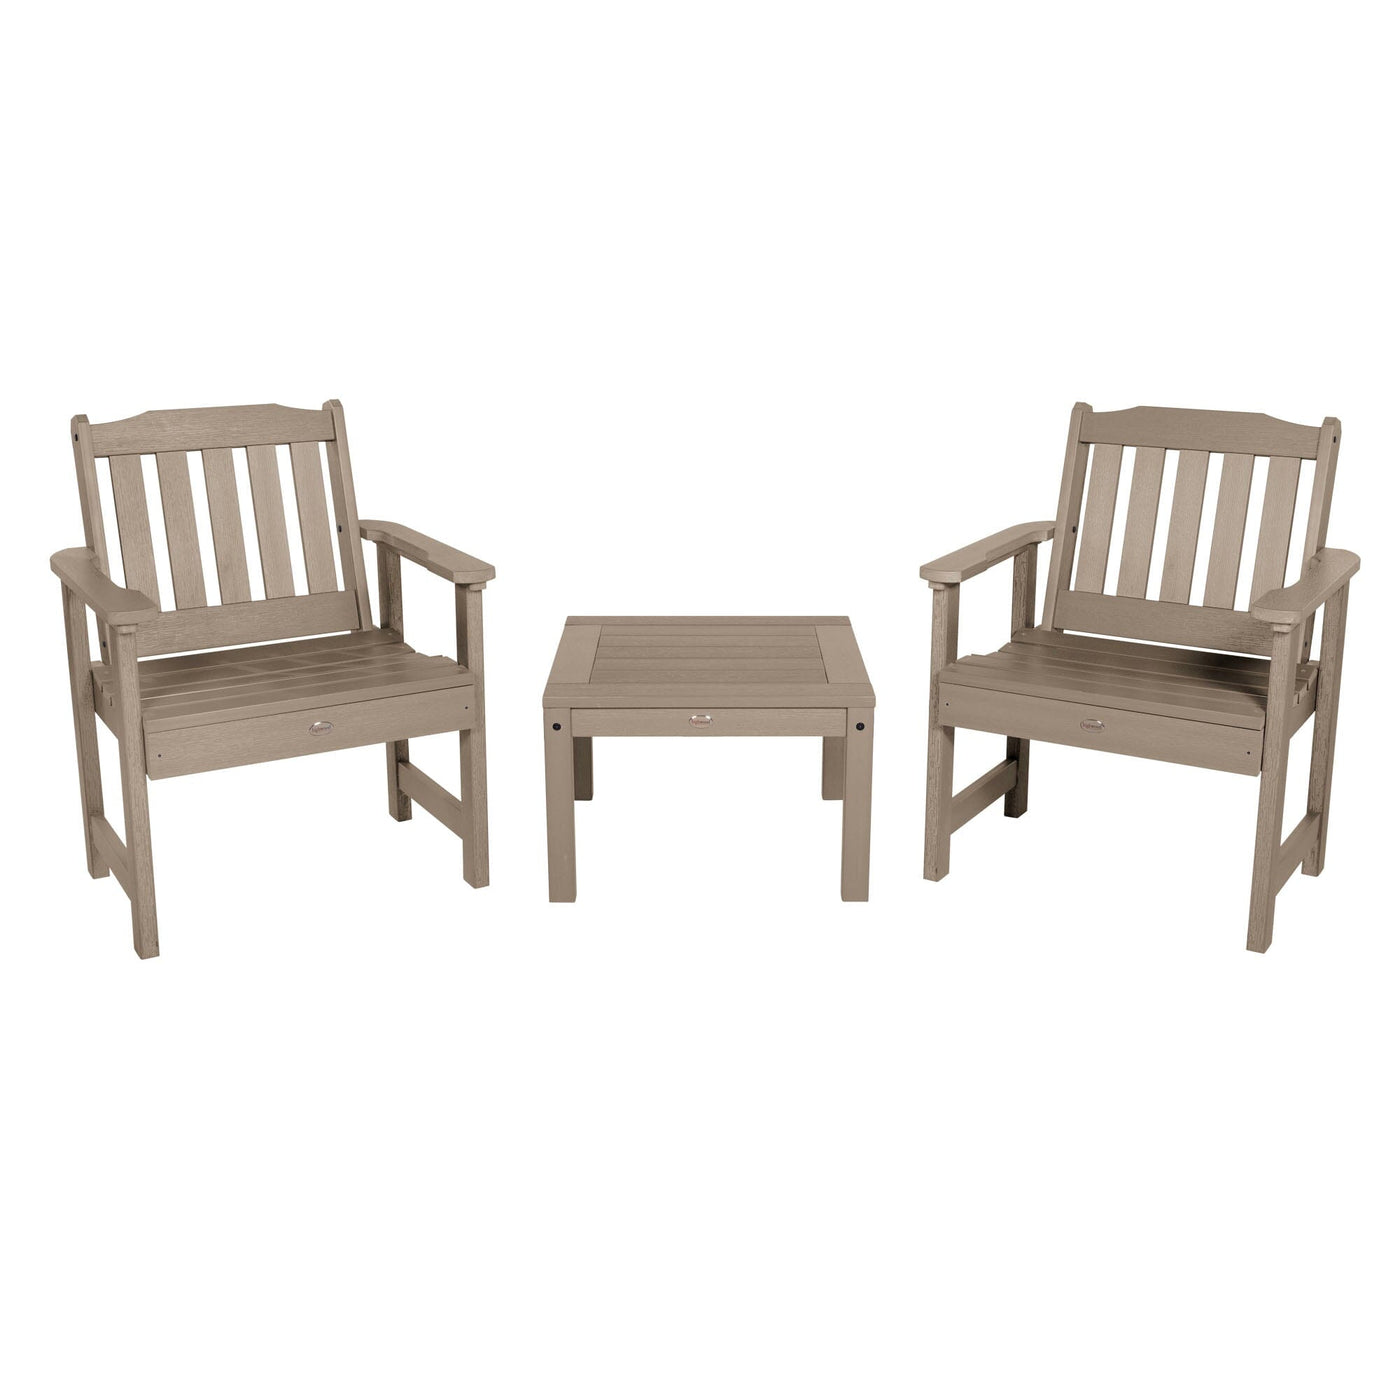 2 Lehigh Garden Chairs with 1 Square Side Table Kitted Sets Highwood USA Woodland Brown 